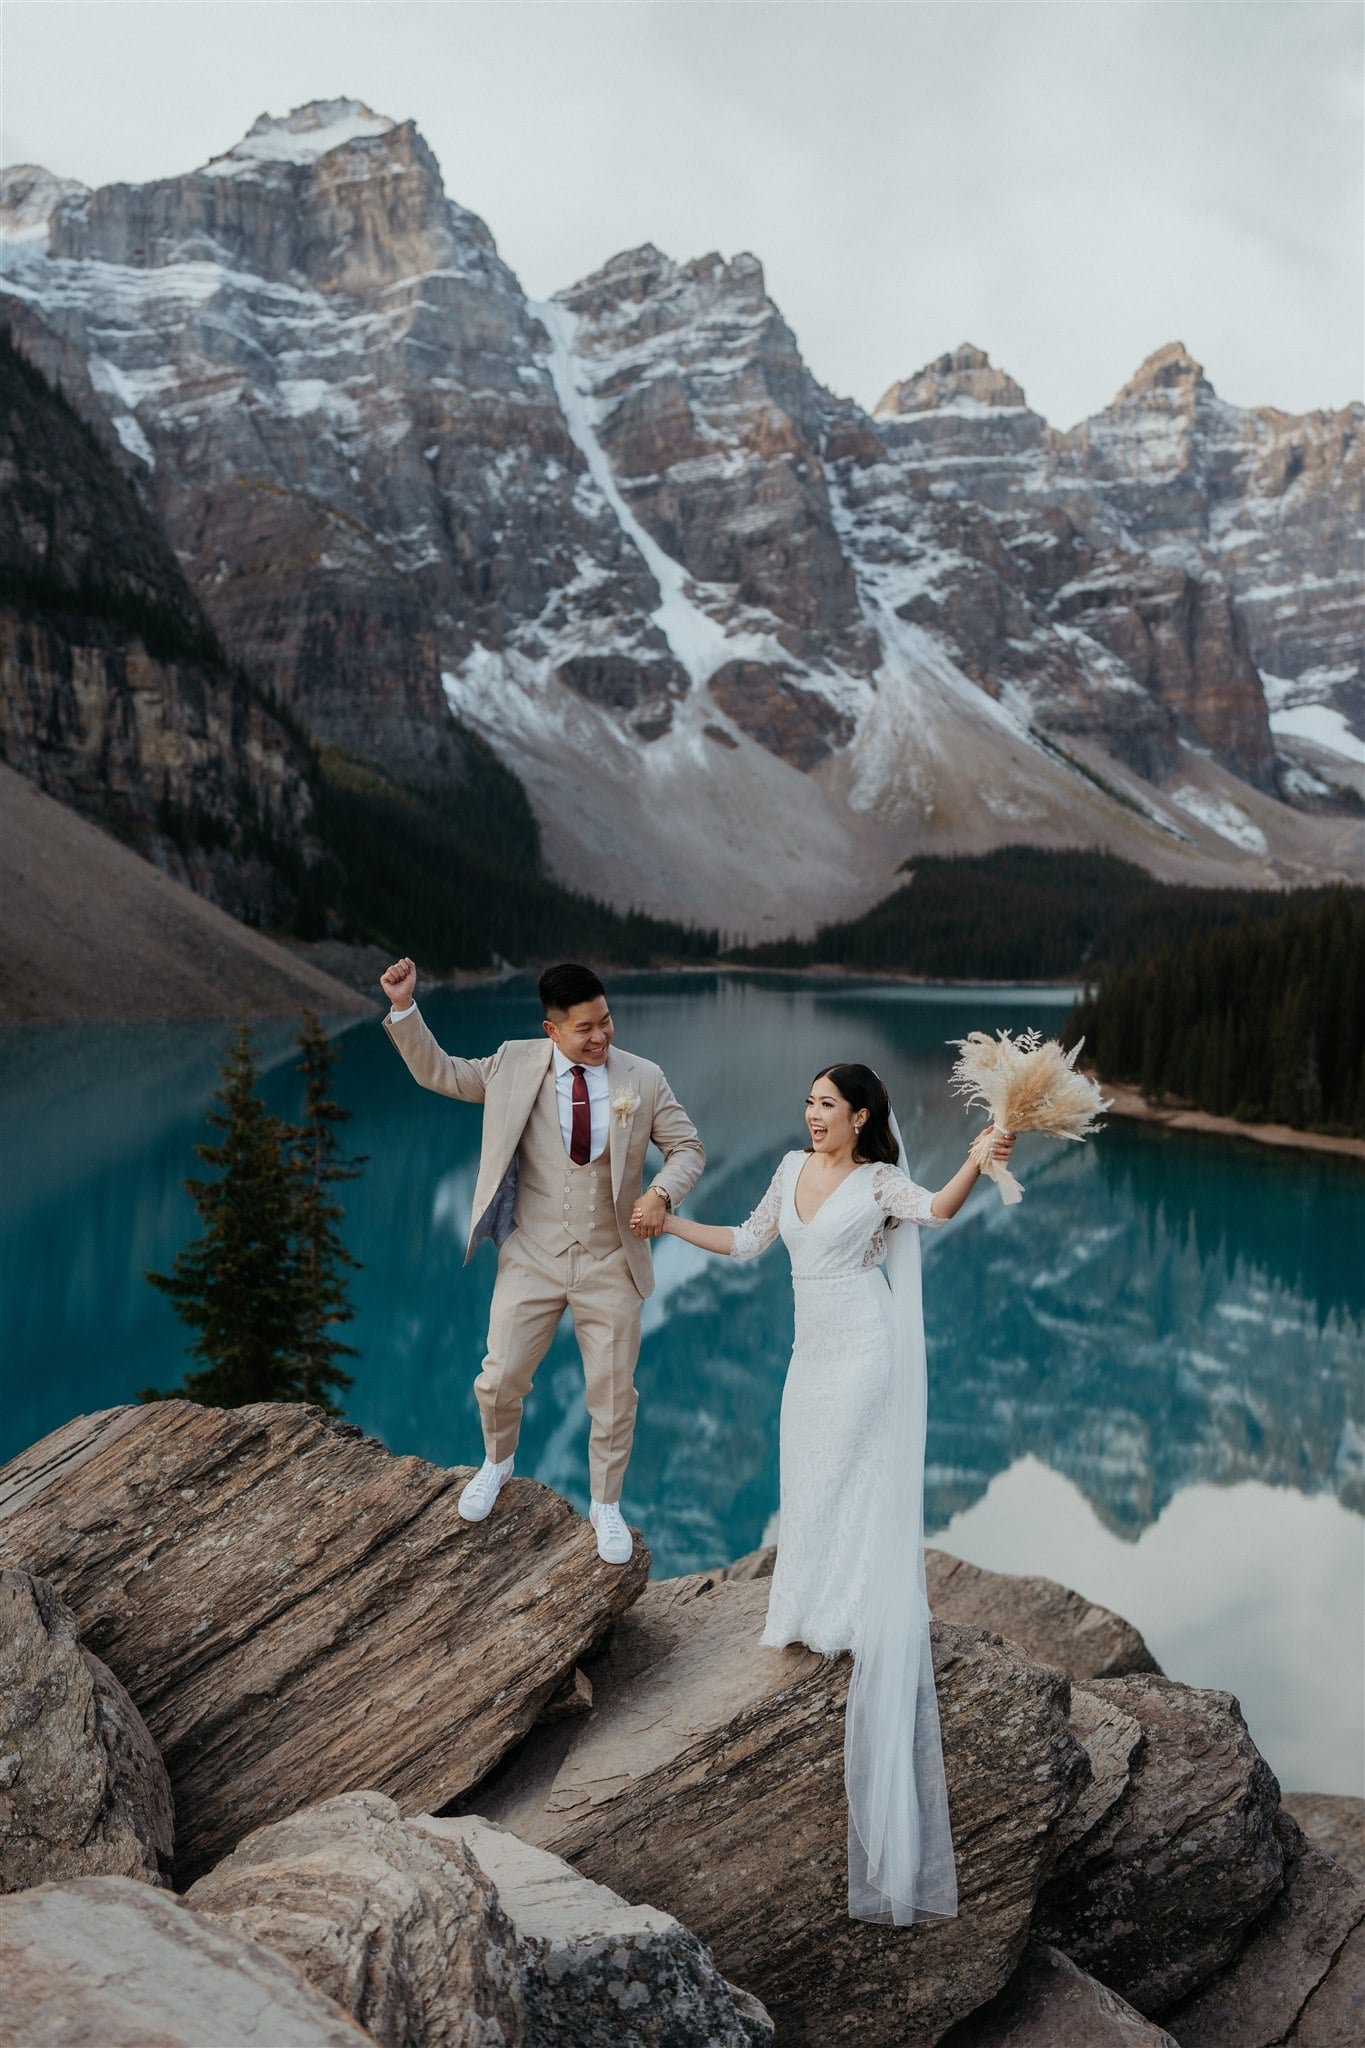 Bride and groom hold hands on a rock during their sunrise elopement photos at Banff National Park